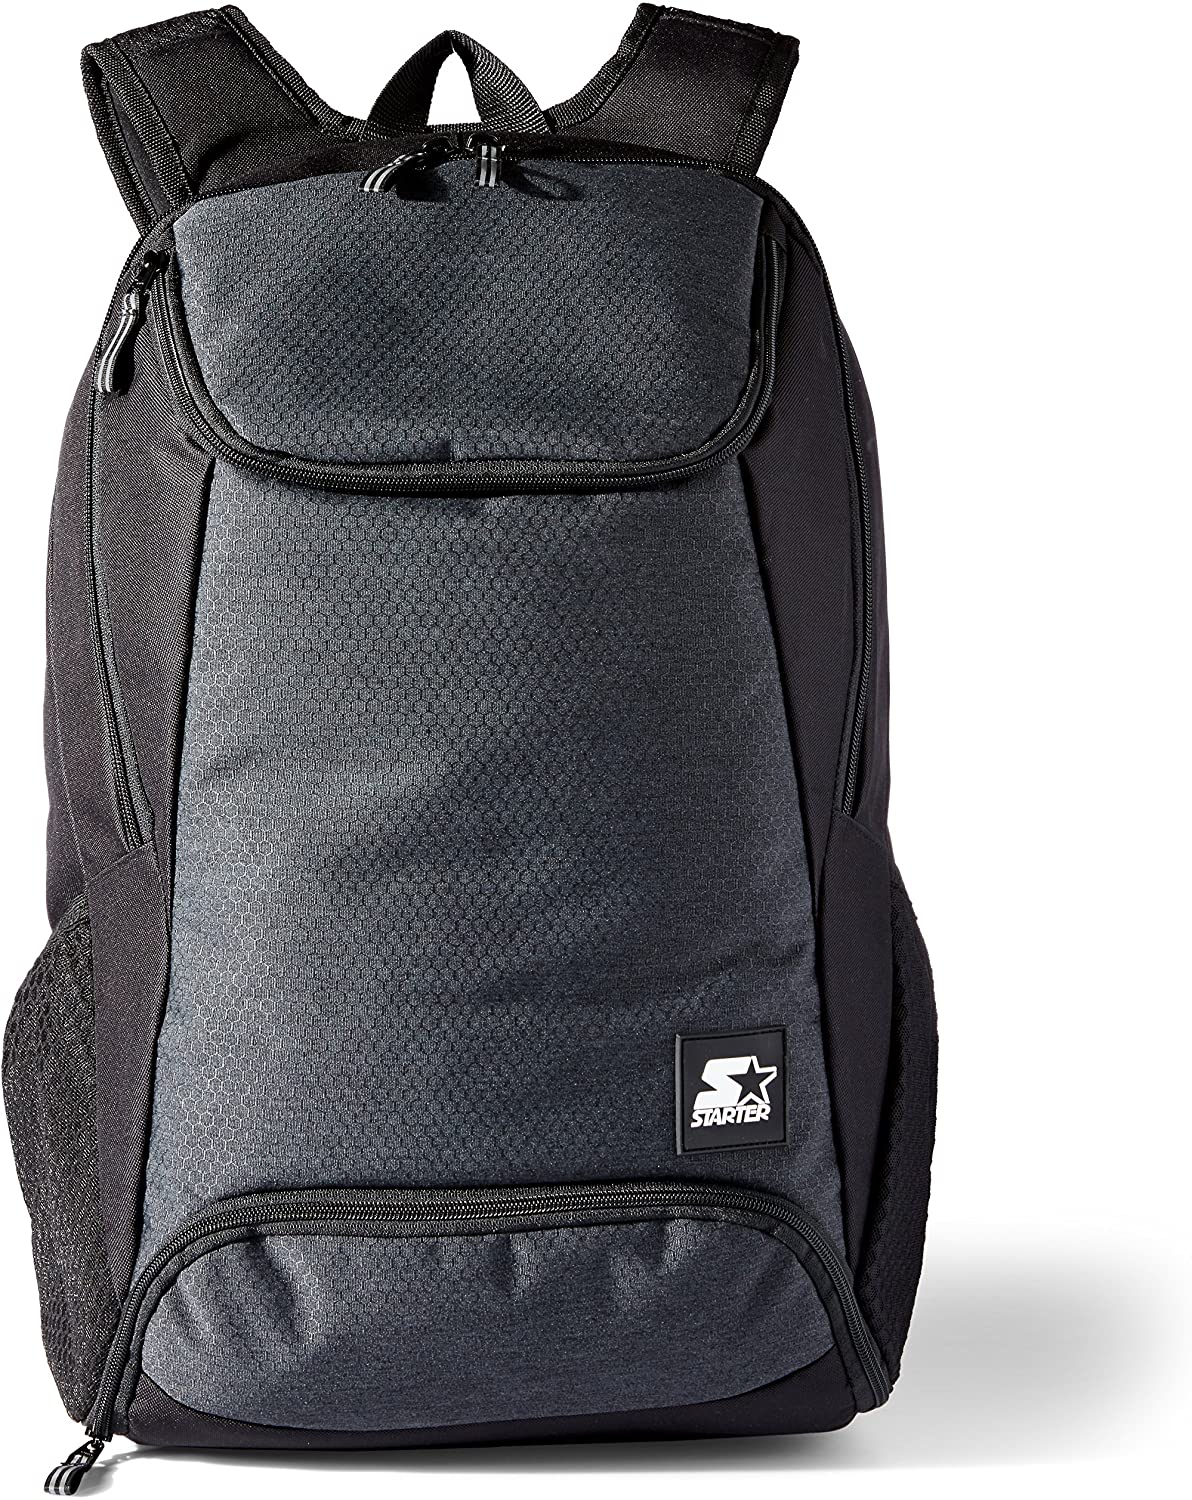  Starter Backpack with Laptop Sleeve and Shoe Pocket